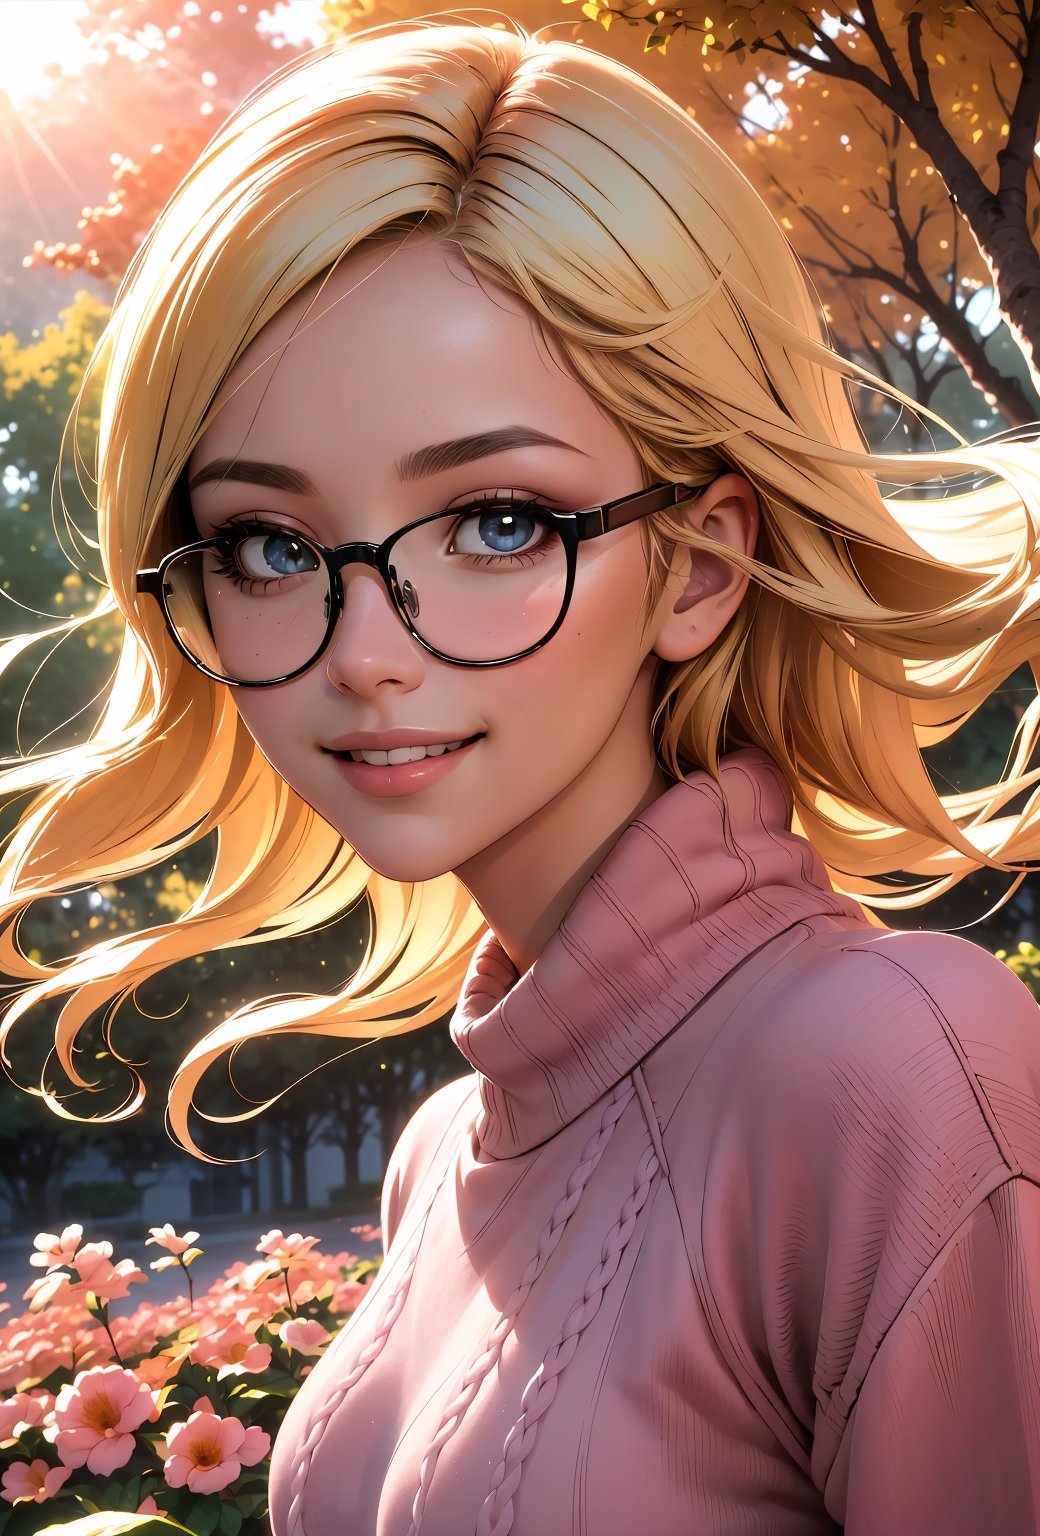 (best quality, masterpiece, perfect face, beautiful and aesthetic:1.2, colorful, dynamic angle, highest detailed face), 1girl, long straight blonde hair, big glasses, black rimmed glasses, happy smile, (wearing a pink oversized_sweater:1.2), pleated skirt, sunset, fall colors, beautiful trees, nature, flowers, windy, hair flowing in the wind, sun shinning through hair, high contrast, (official art, extreme detailed, highest detailed, natural skin texture, hyperrealism, soft light, sharp, perfect face)
